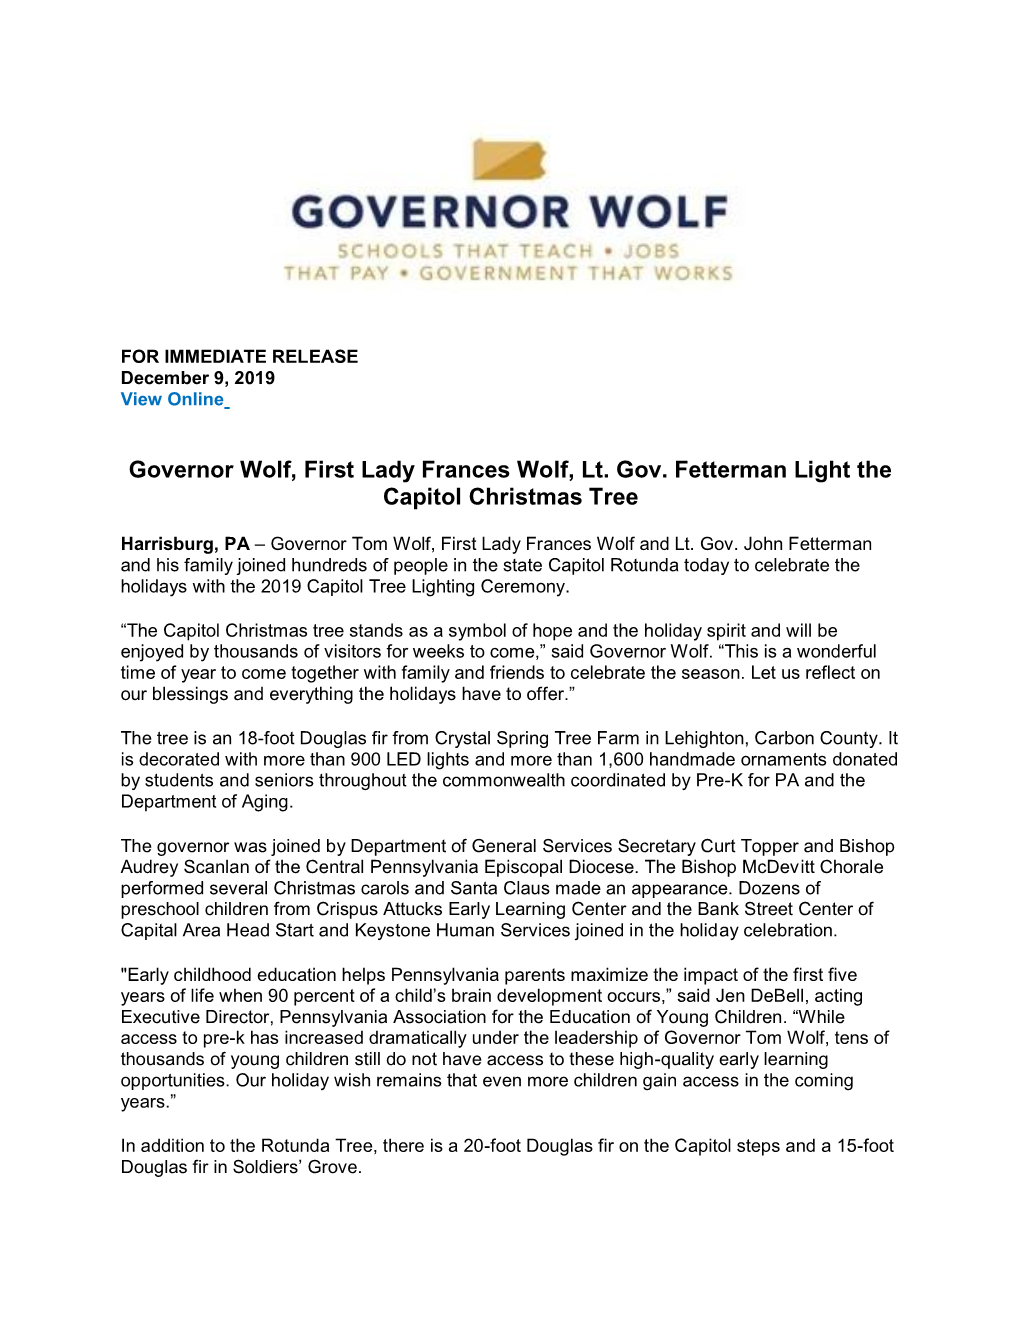 Governor Wolf, First Lady Frances Wolf, Lt. Gov